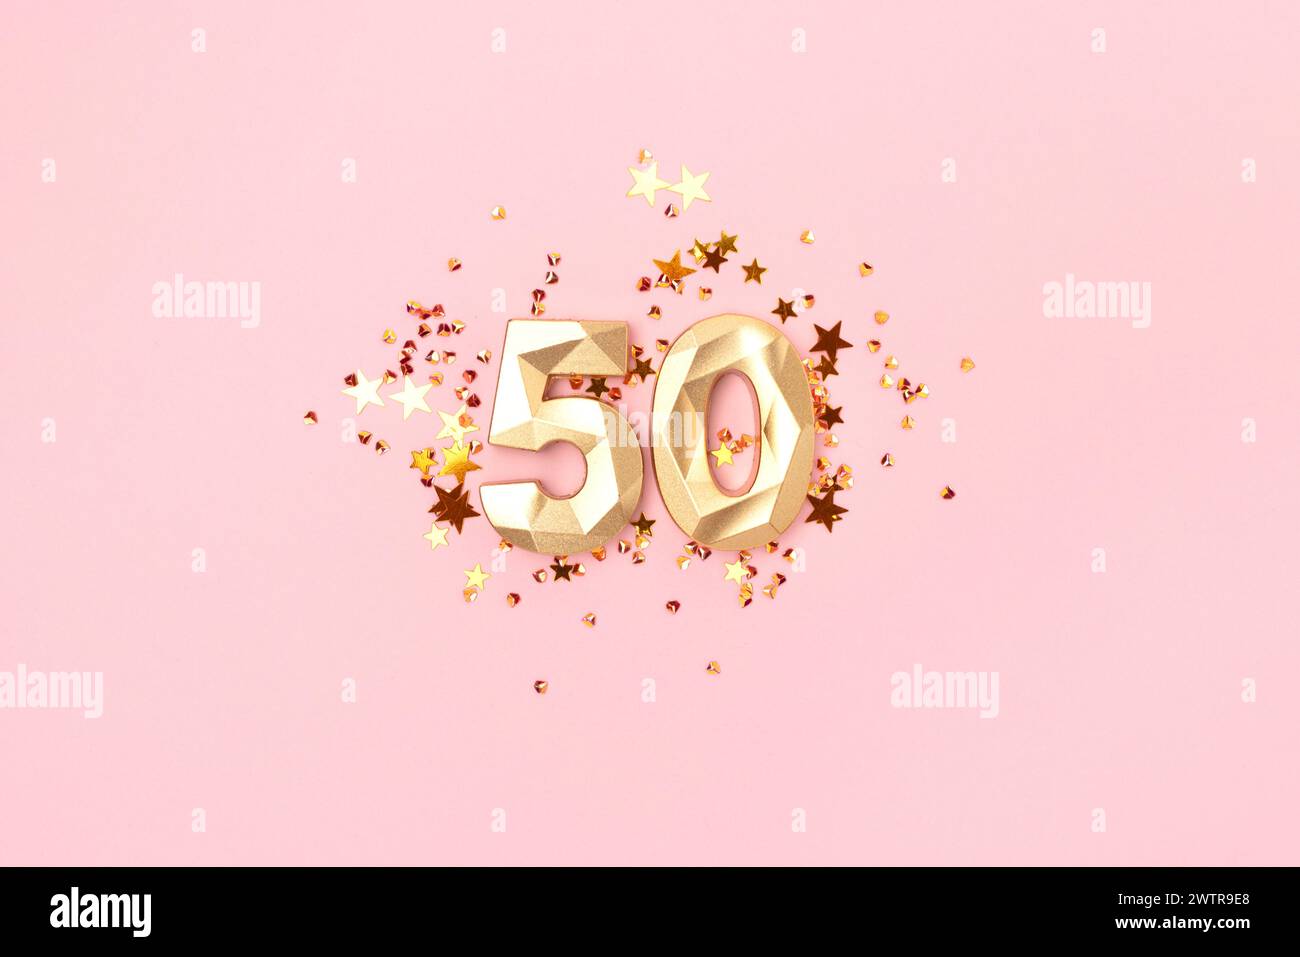 Gold colored number 50 and stars confetti on a pink background. Creative concept. Stock Photo